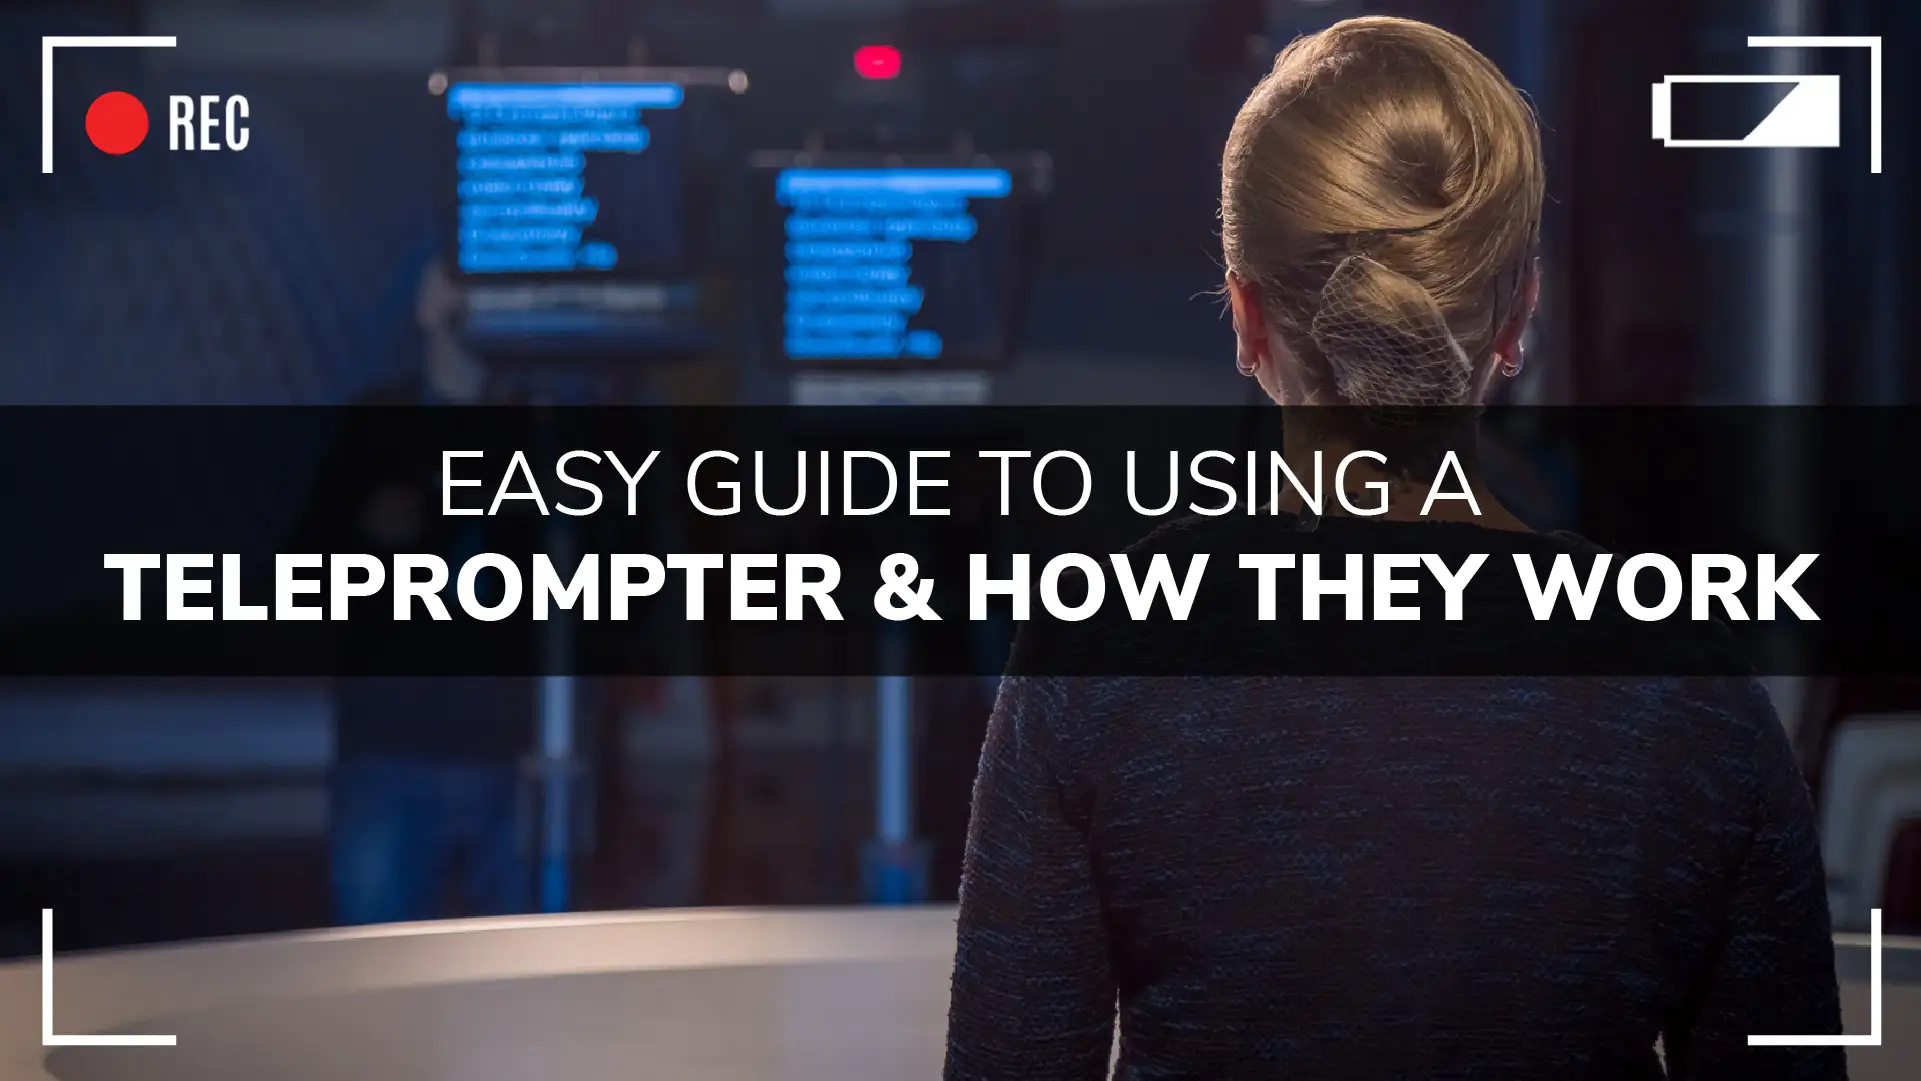 Easy Guide To Using A Teleprompter & How They Work